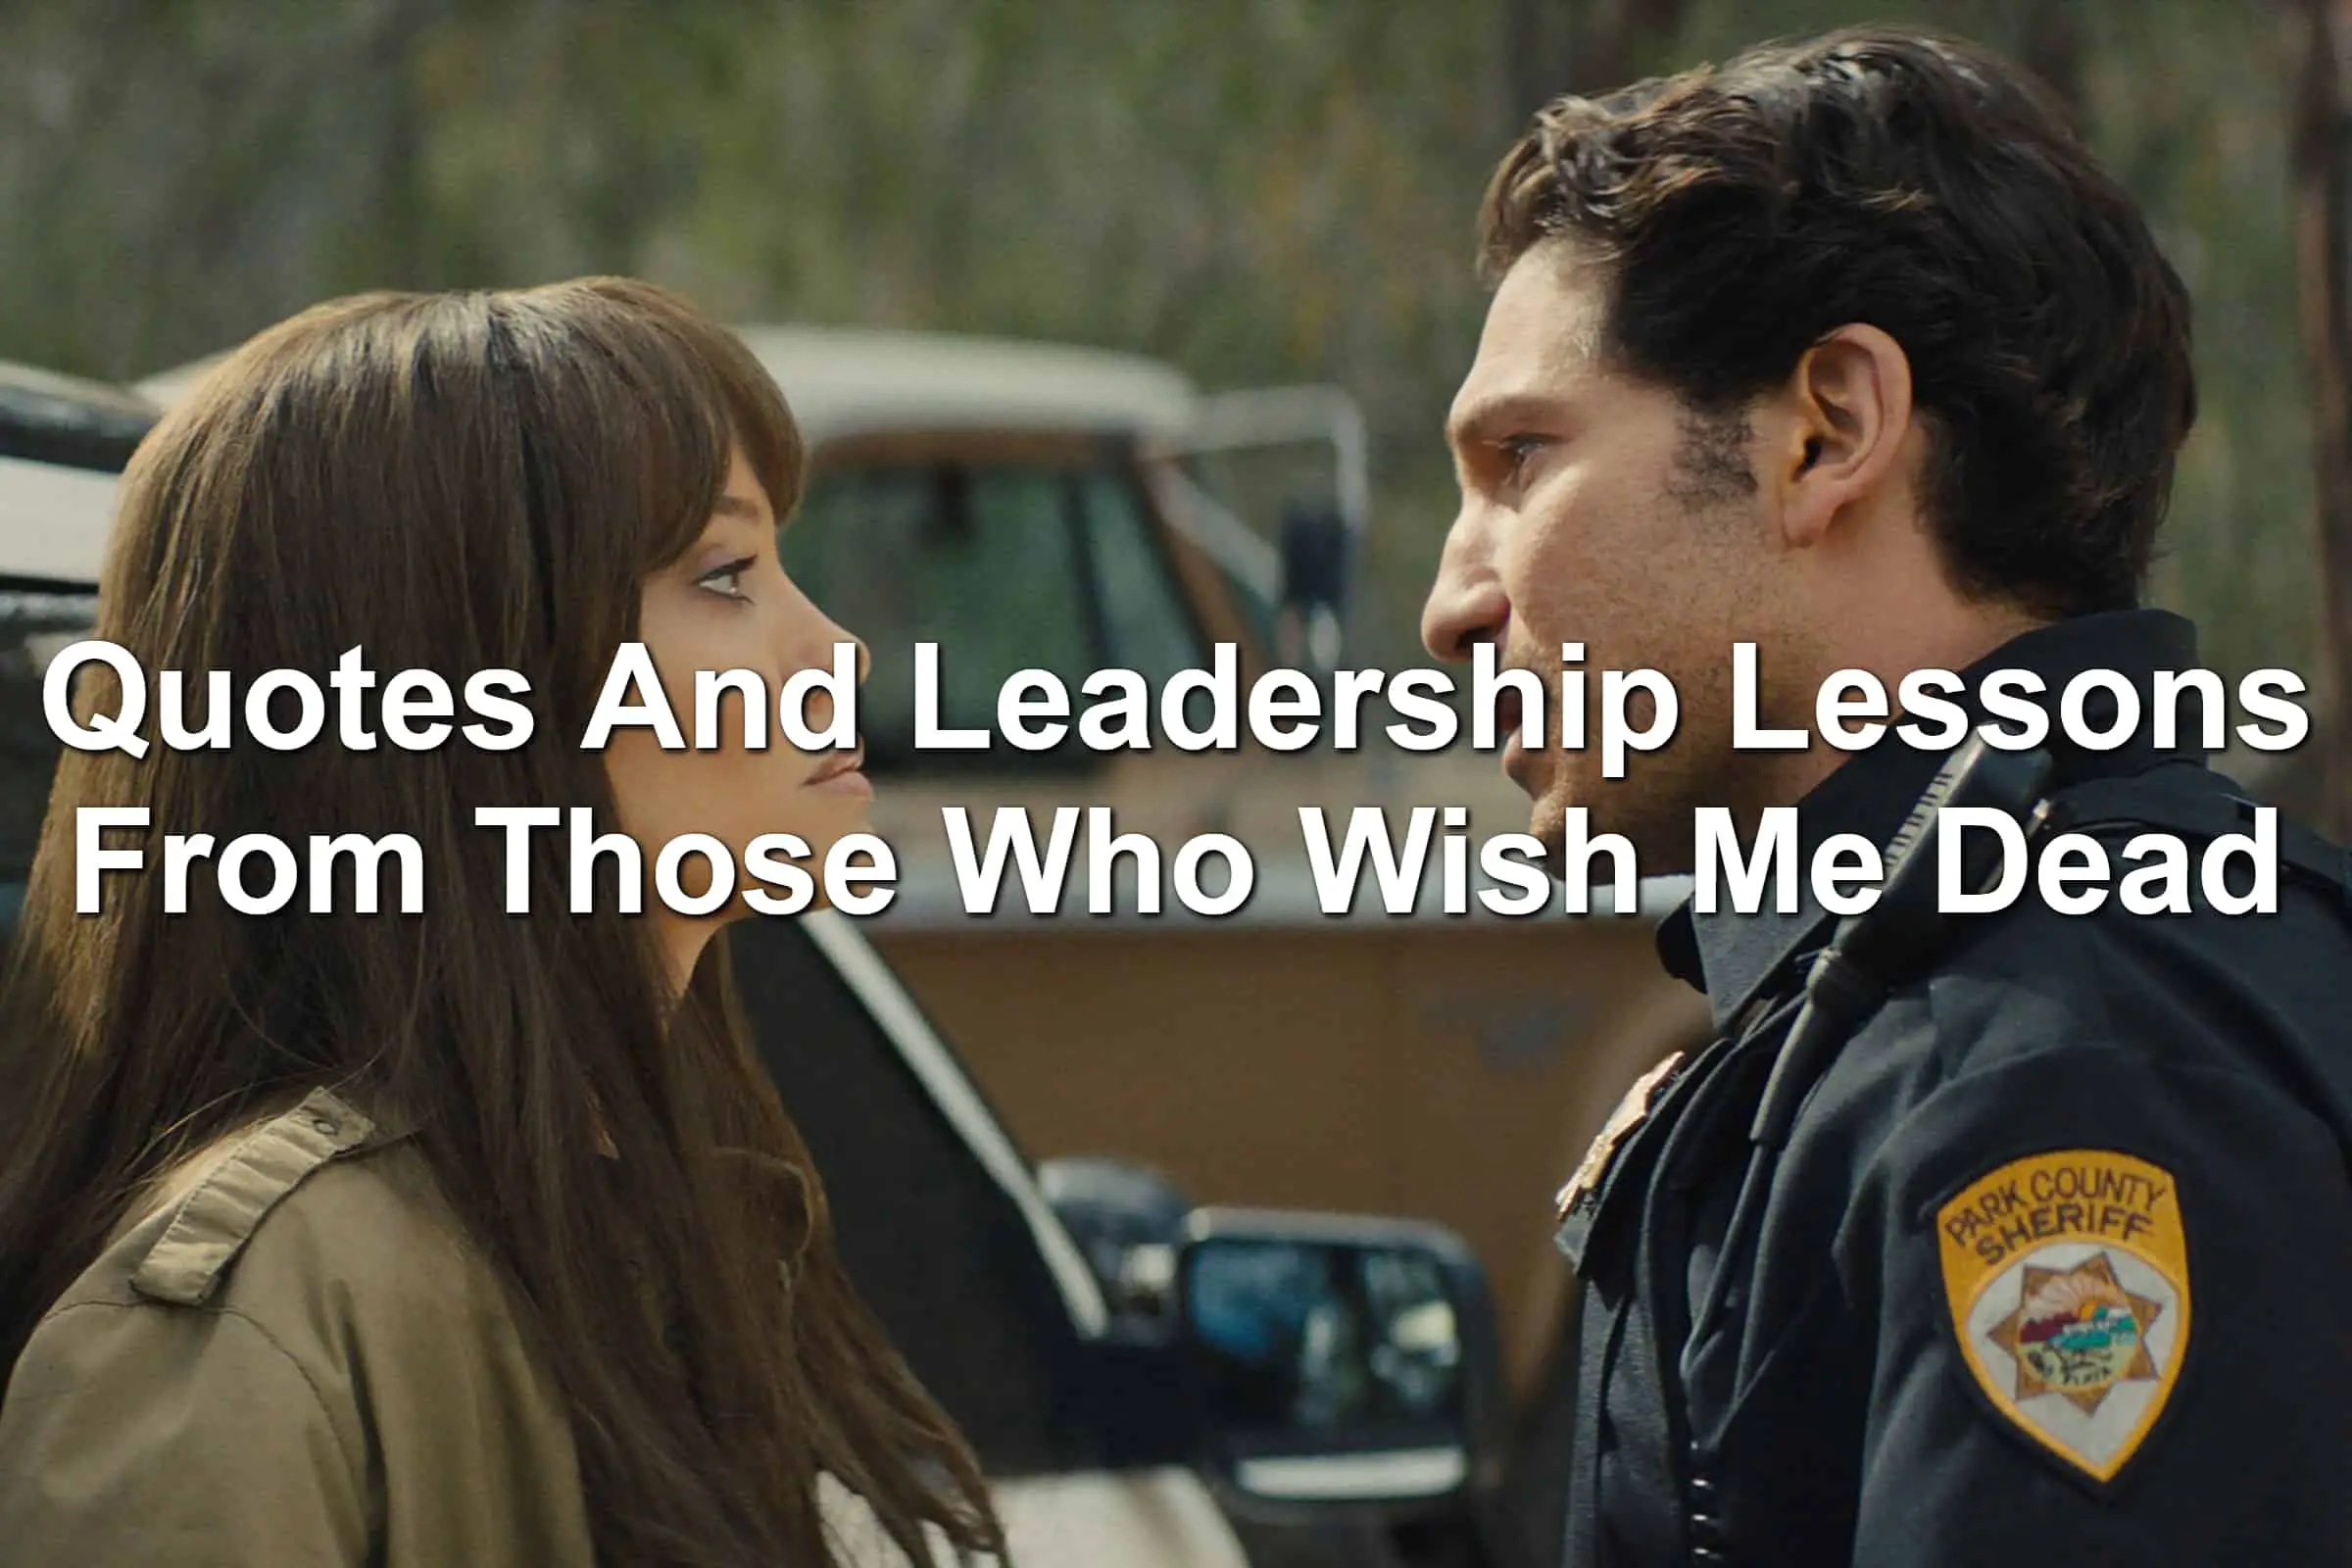 Learn leadership lessons from Those Who Wish Me Dead starring Jon Bernthal and Angelina Jolie